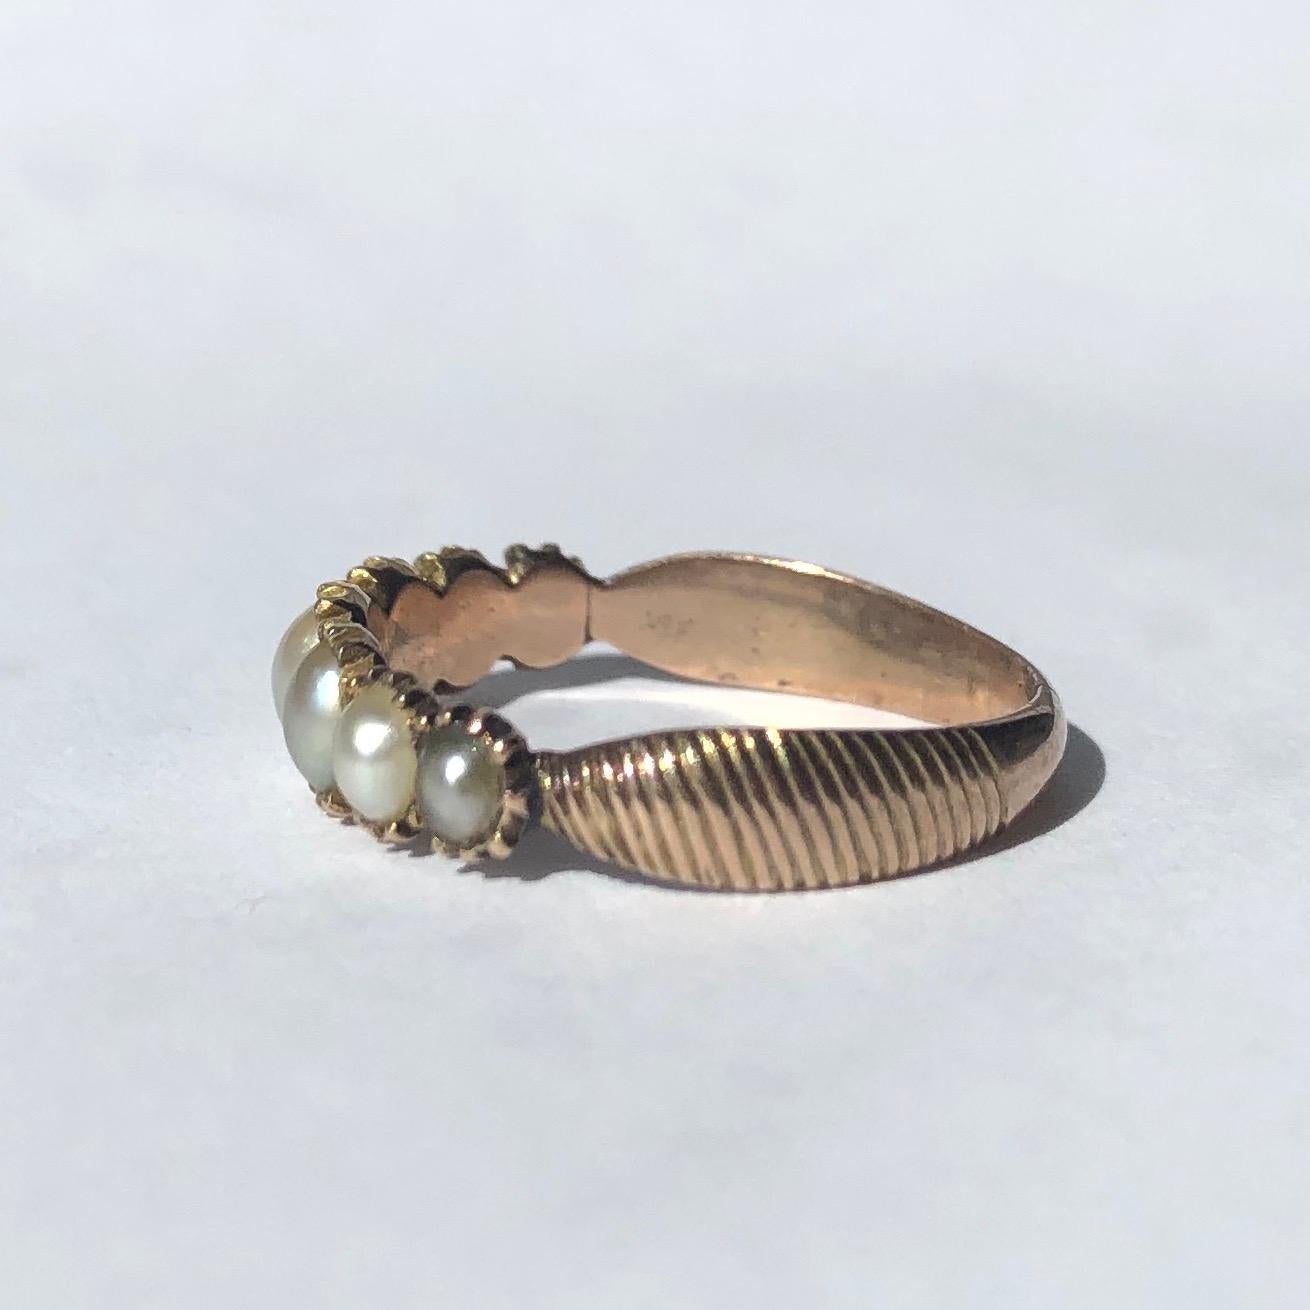 This gorgeous seven stone earl ring is modelled in gold and has a reeded detailed band. The size of the pearls graduate in size starting with the largest at the centre.

Ring Size: M 1/2 or 6 1/2 
Band Width: 4.5mm

Weight: 1.7g